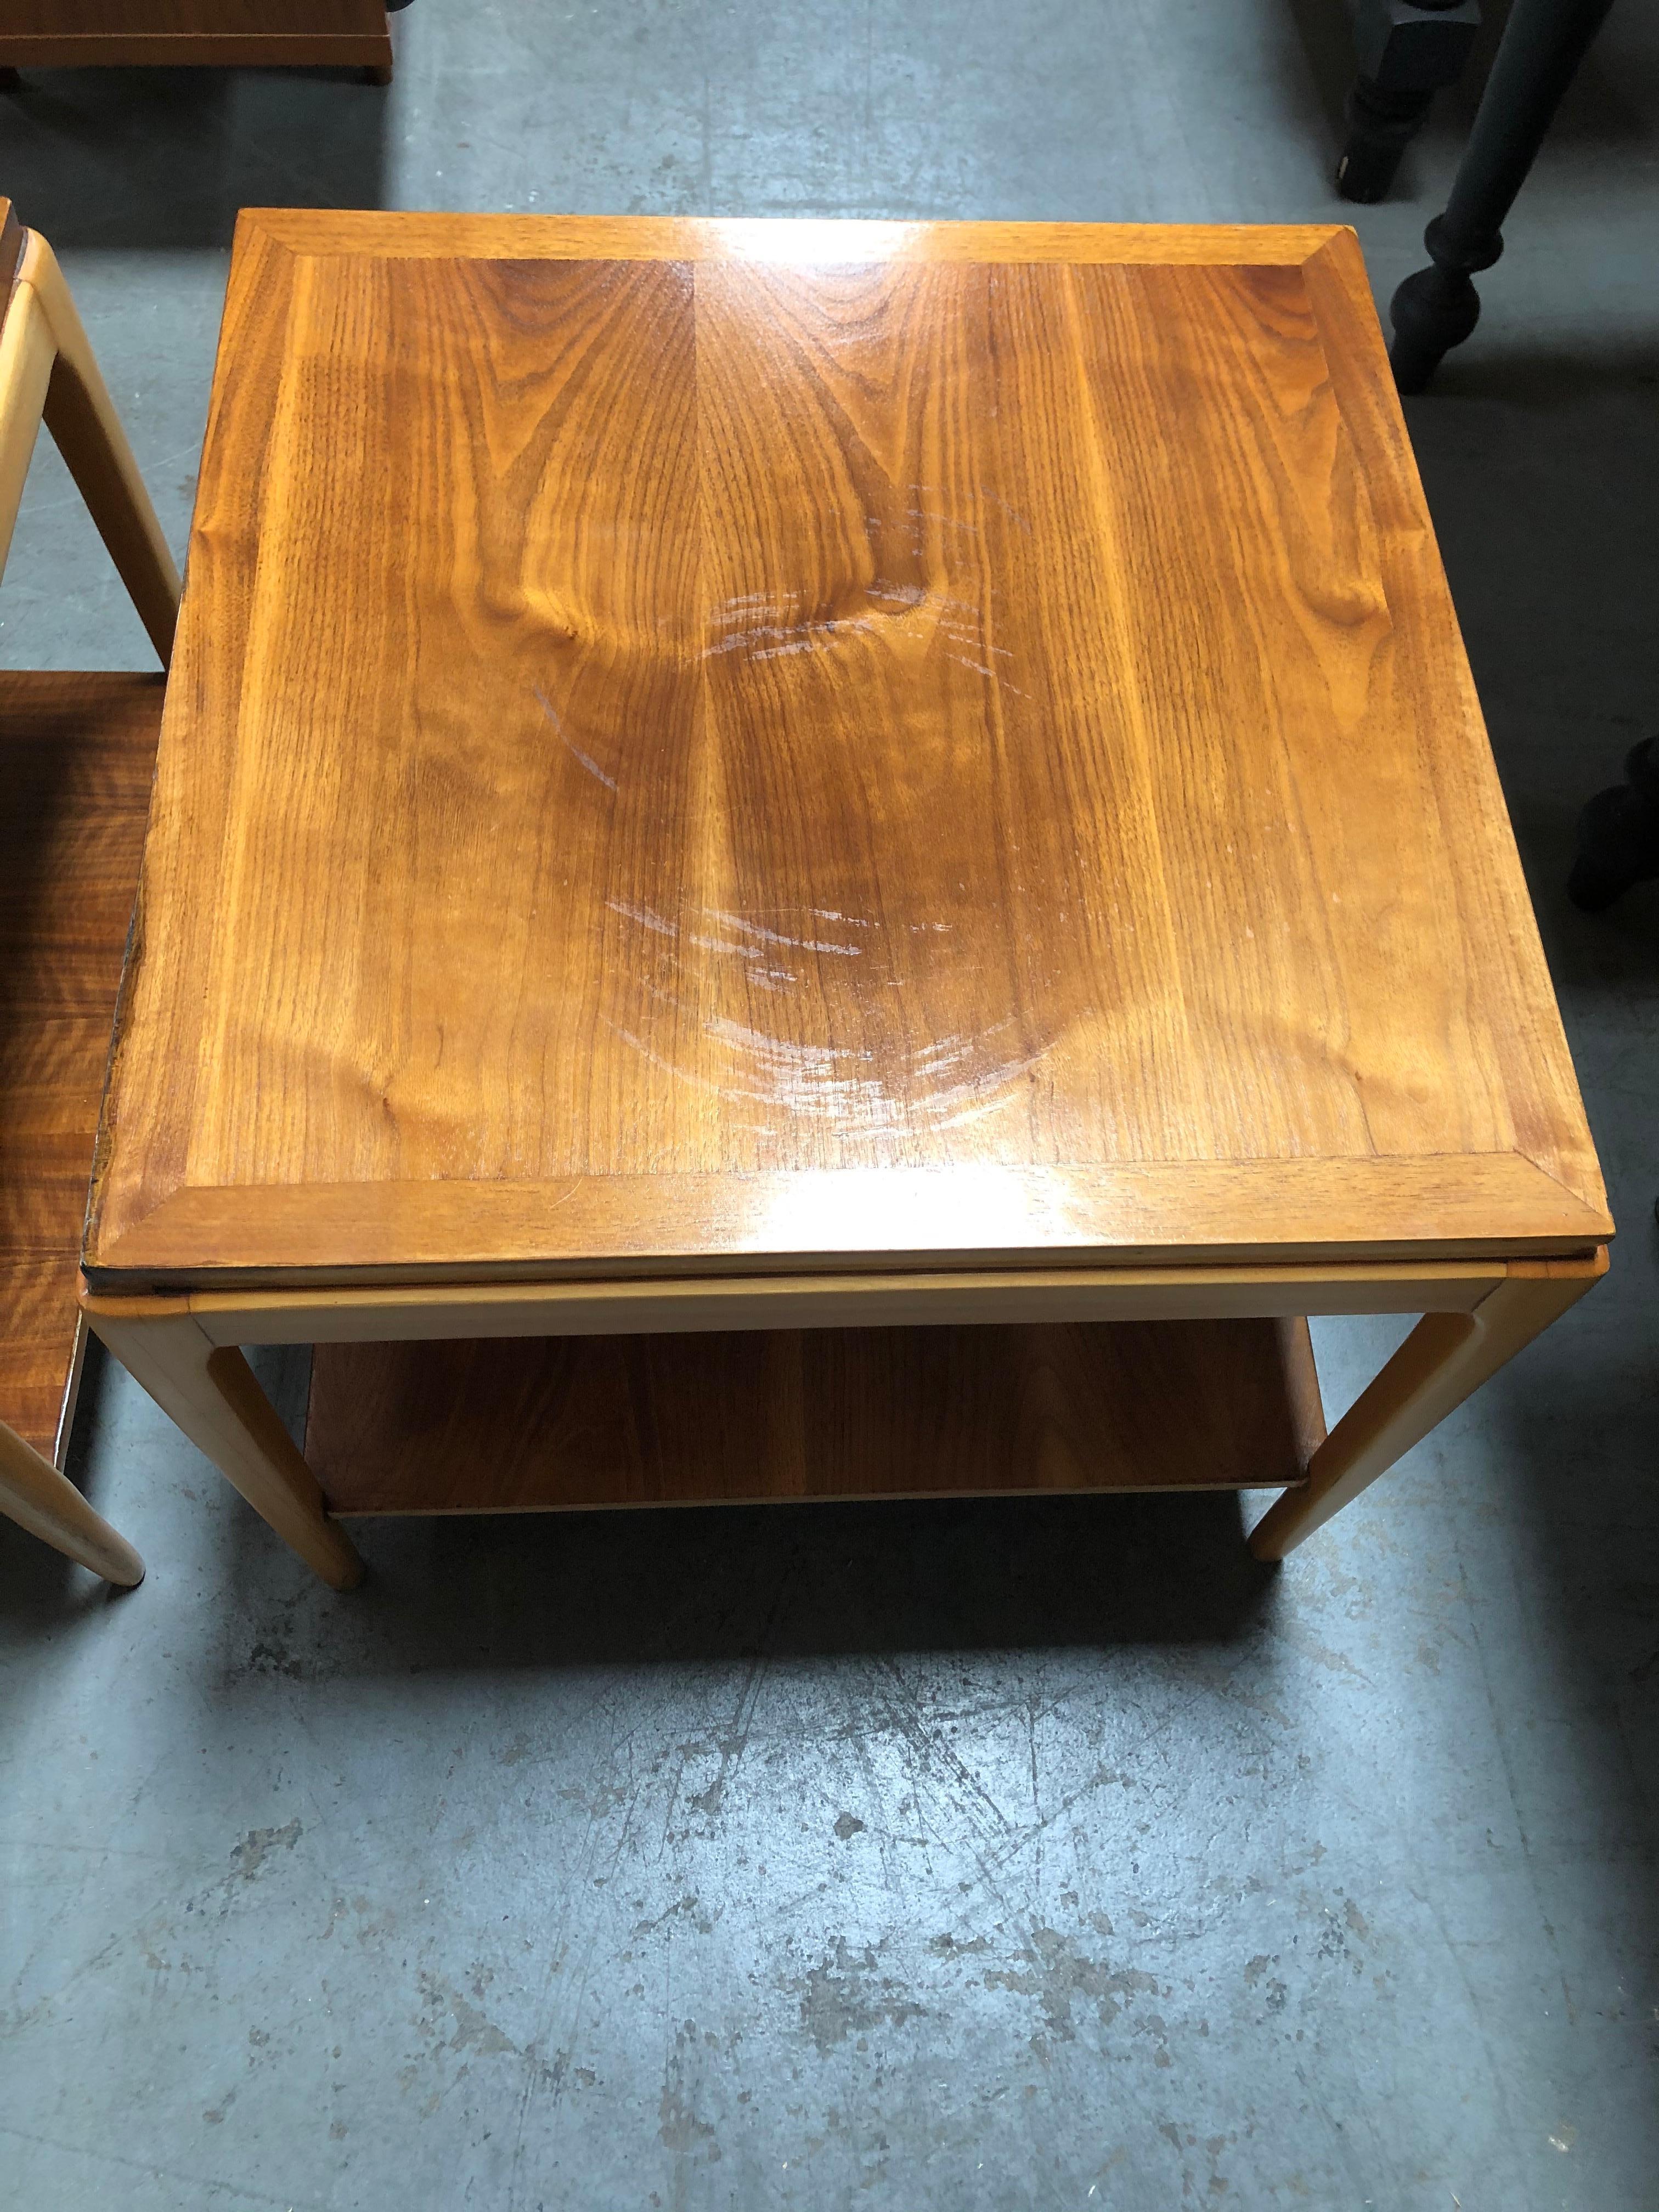 Pair of vintage Mid-Century Modern wood end tables or bedside tables each table has a lower shelf.